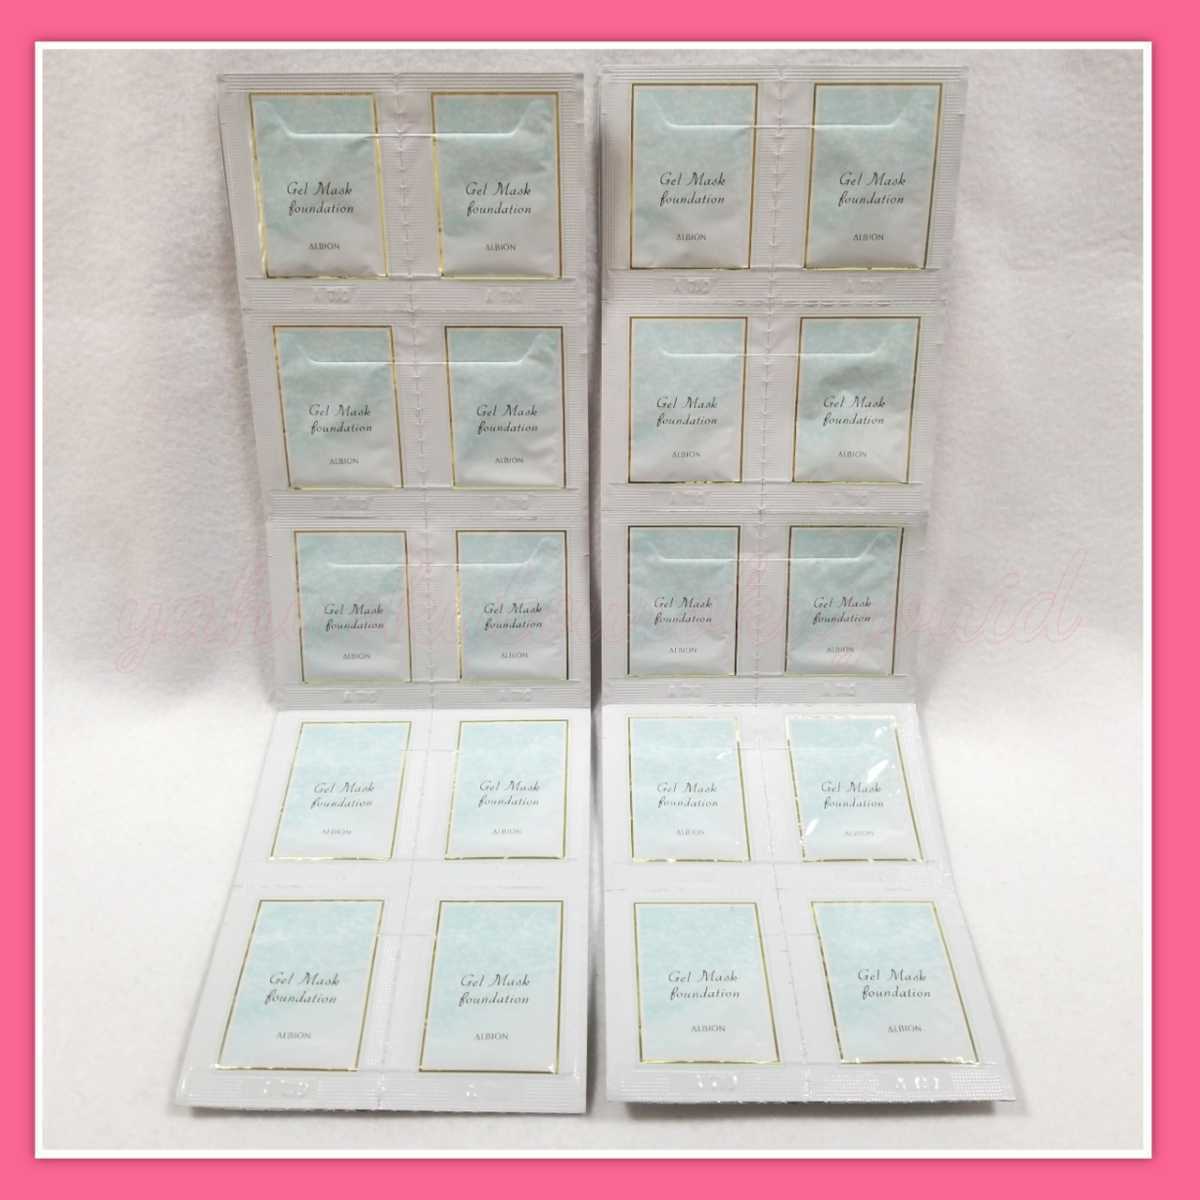 [ free shipping ] new goods 20 piece regular price 6480 jpy Albion gel mask foundation 0.3g beige 050 piece packing dry . spring summer hyaluronic acid ALBION